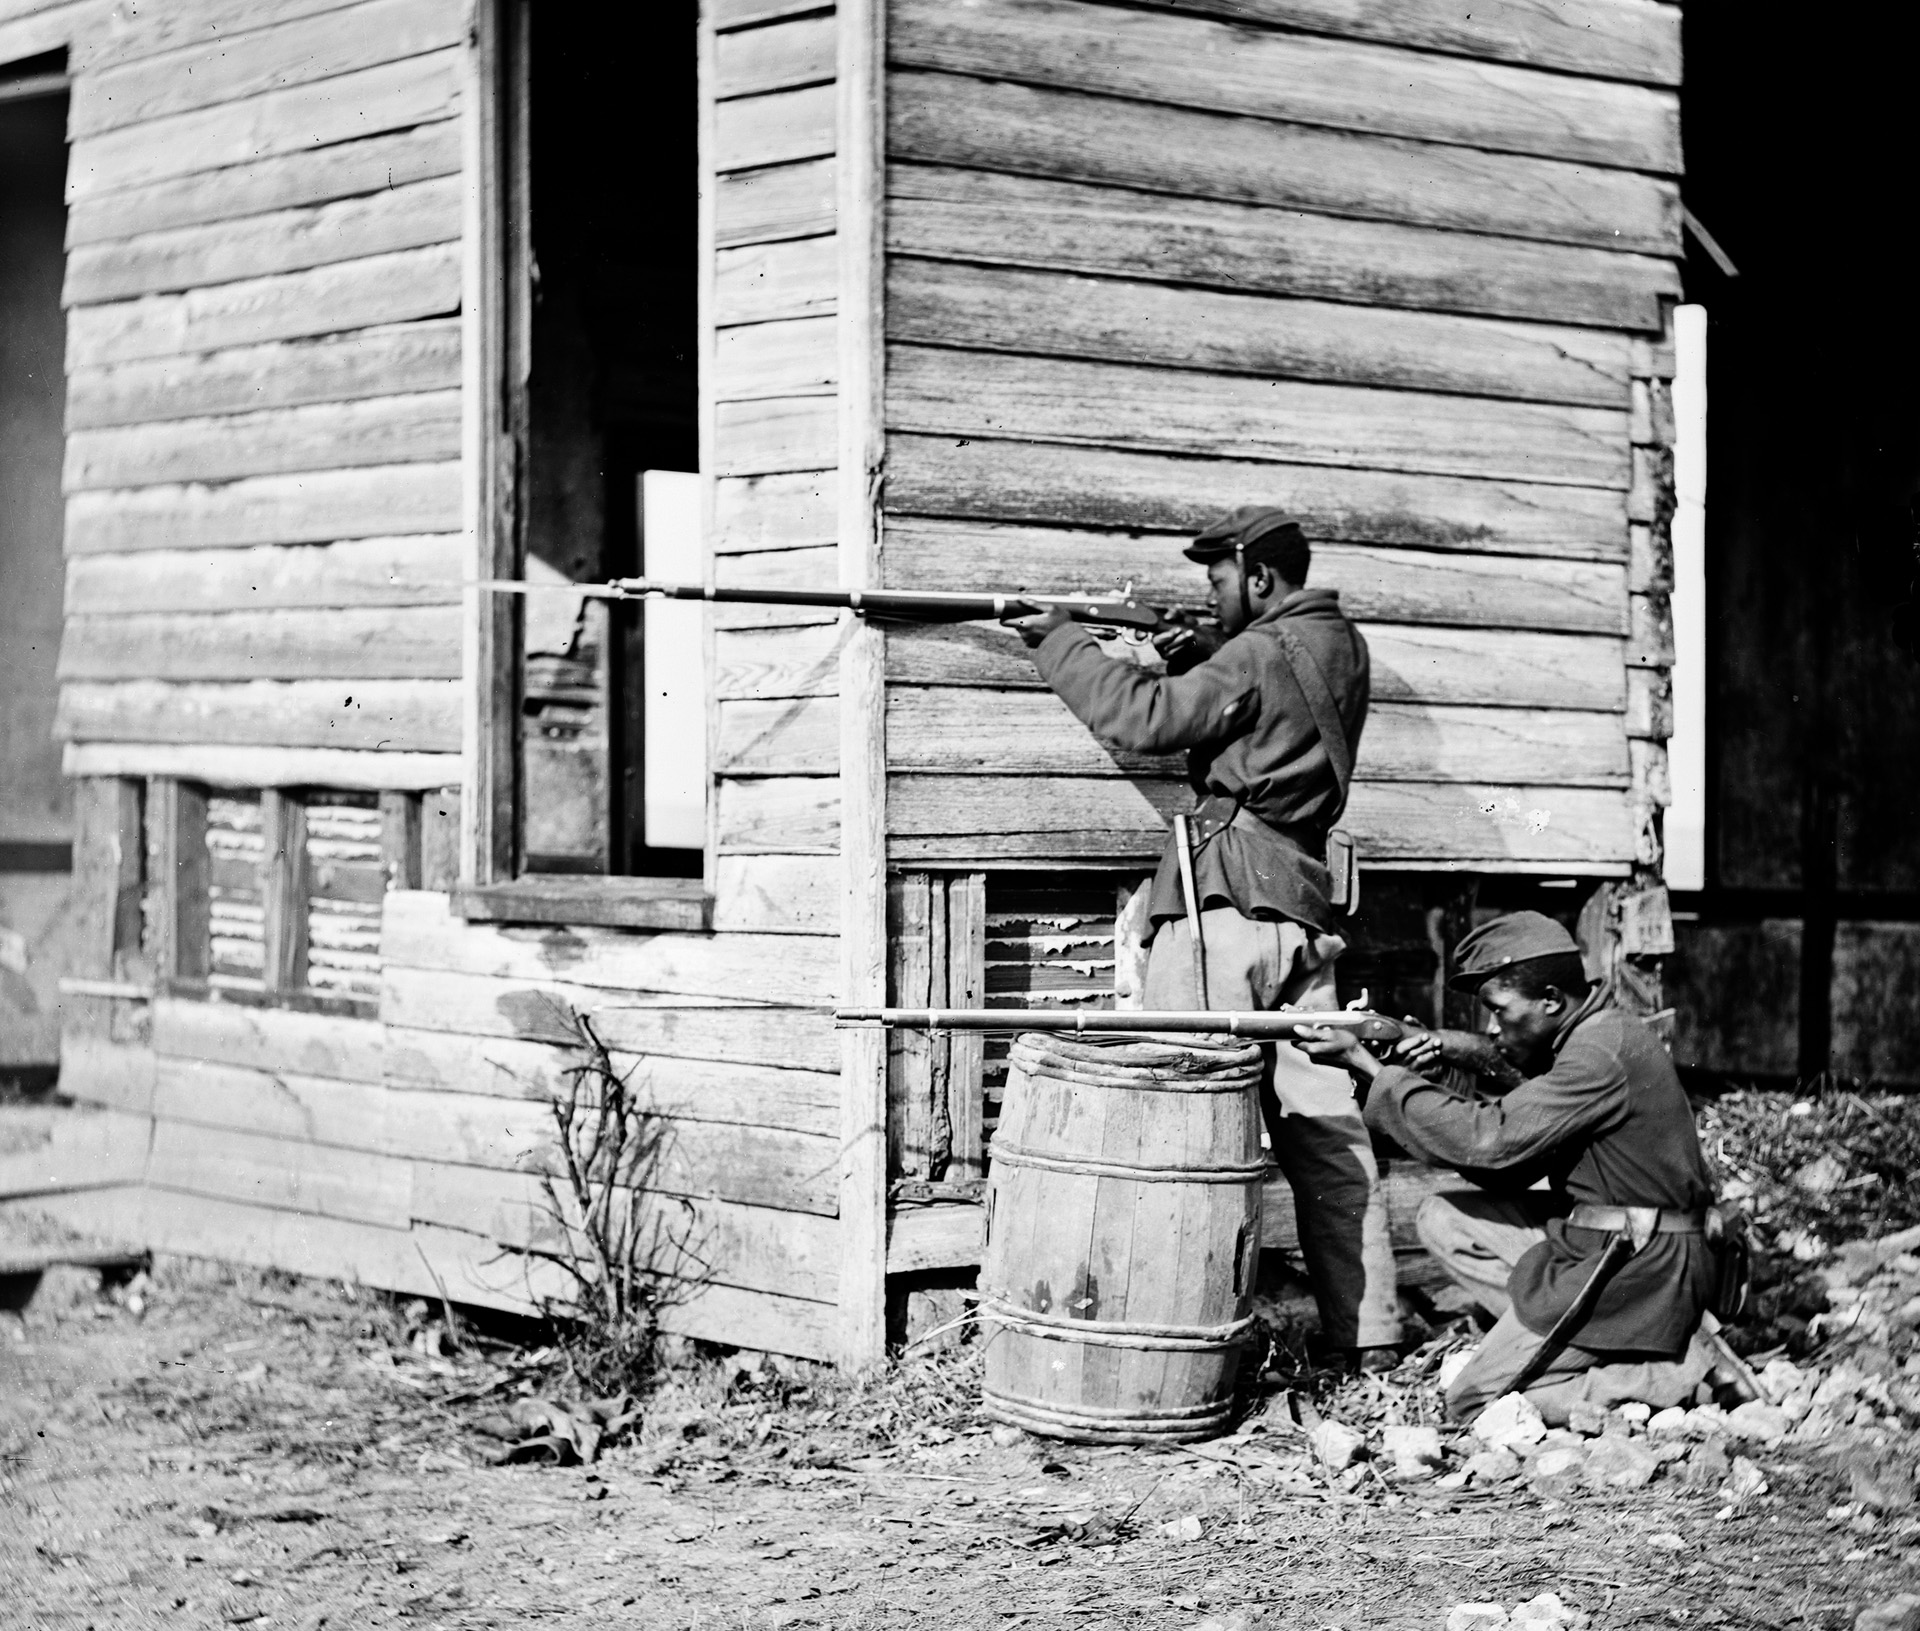 The soldiers of the 55th United States Colored Infantry Regiment sought revenge for the alleged massacre of several dozen black prisoners Fort Pillow that occurred on Forrest’s watch.